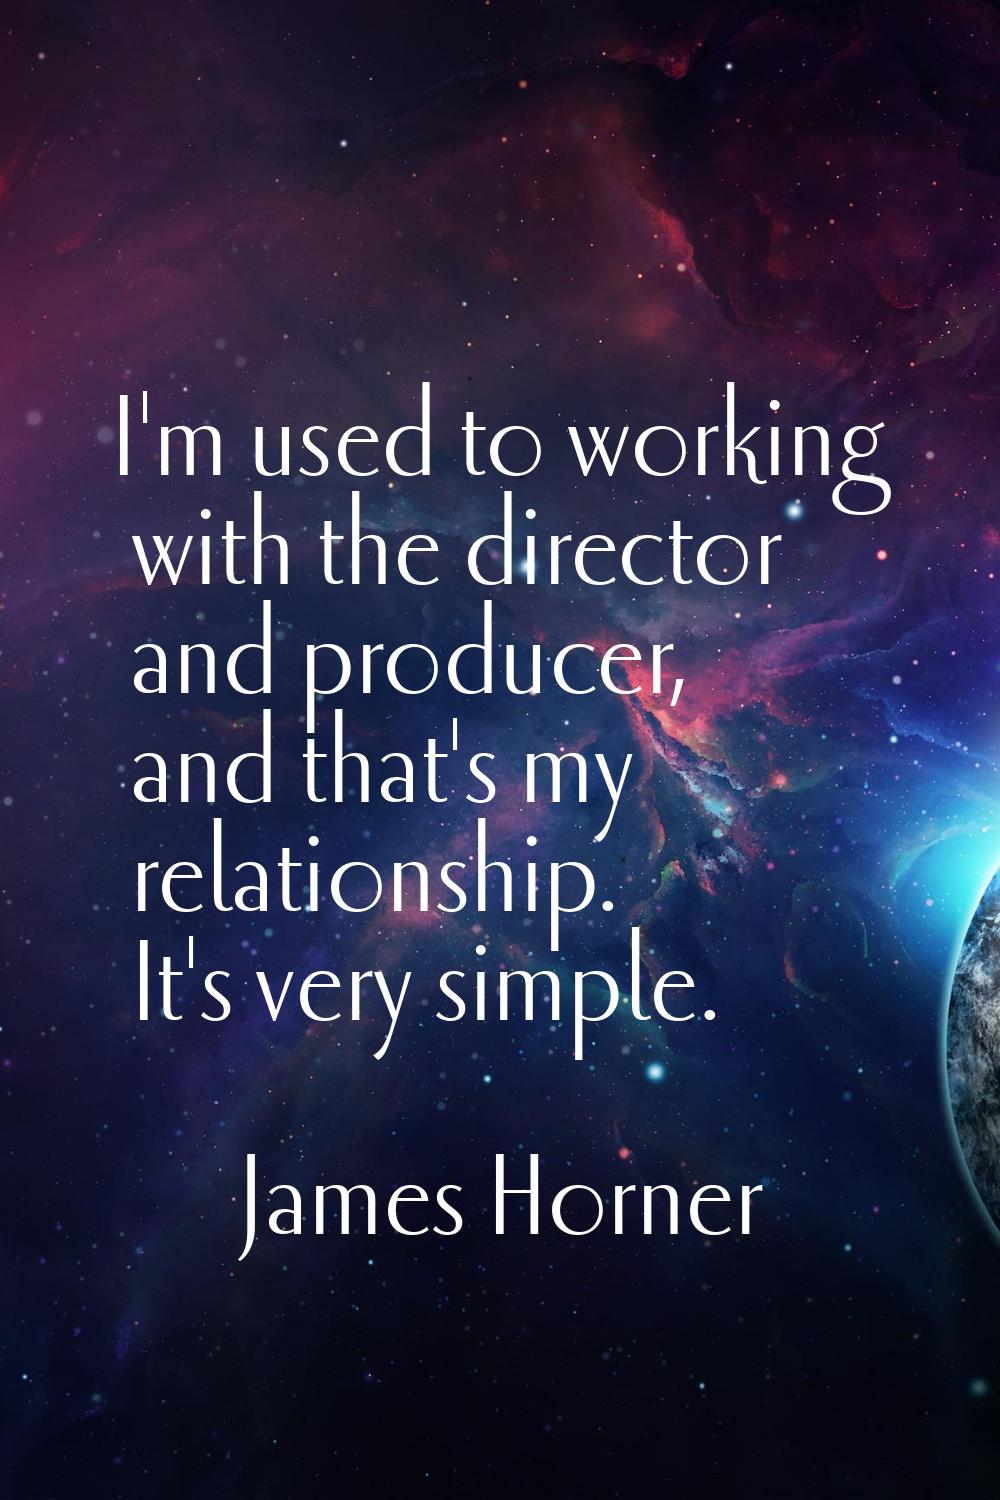 I'm used to working with the director and producer, and that's my relationship. It's very simple.